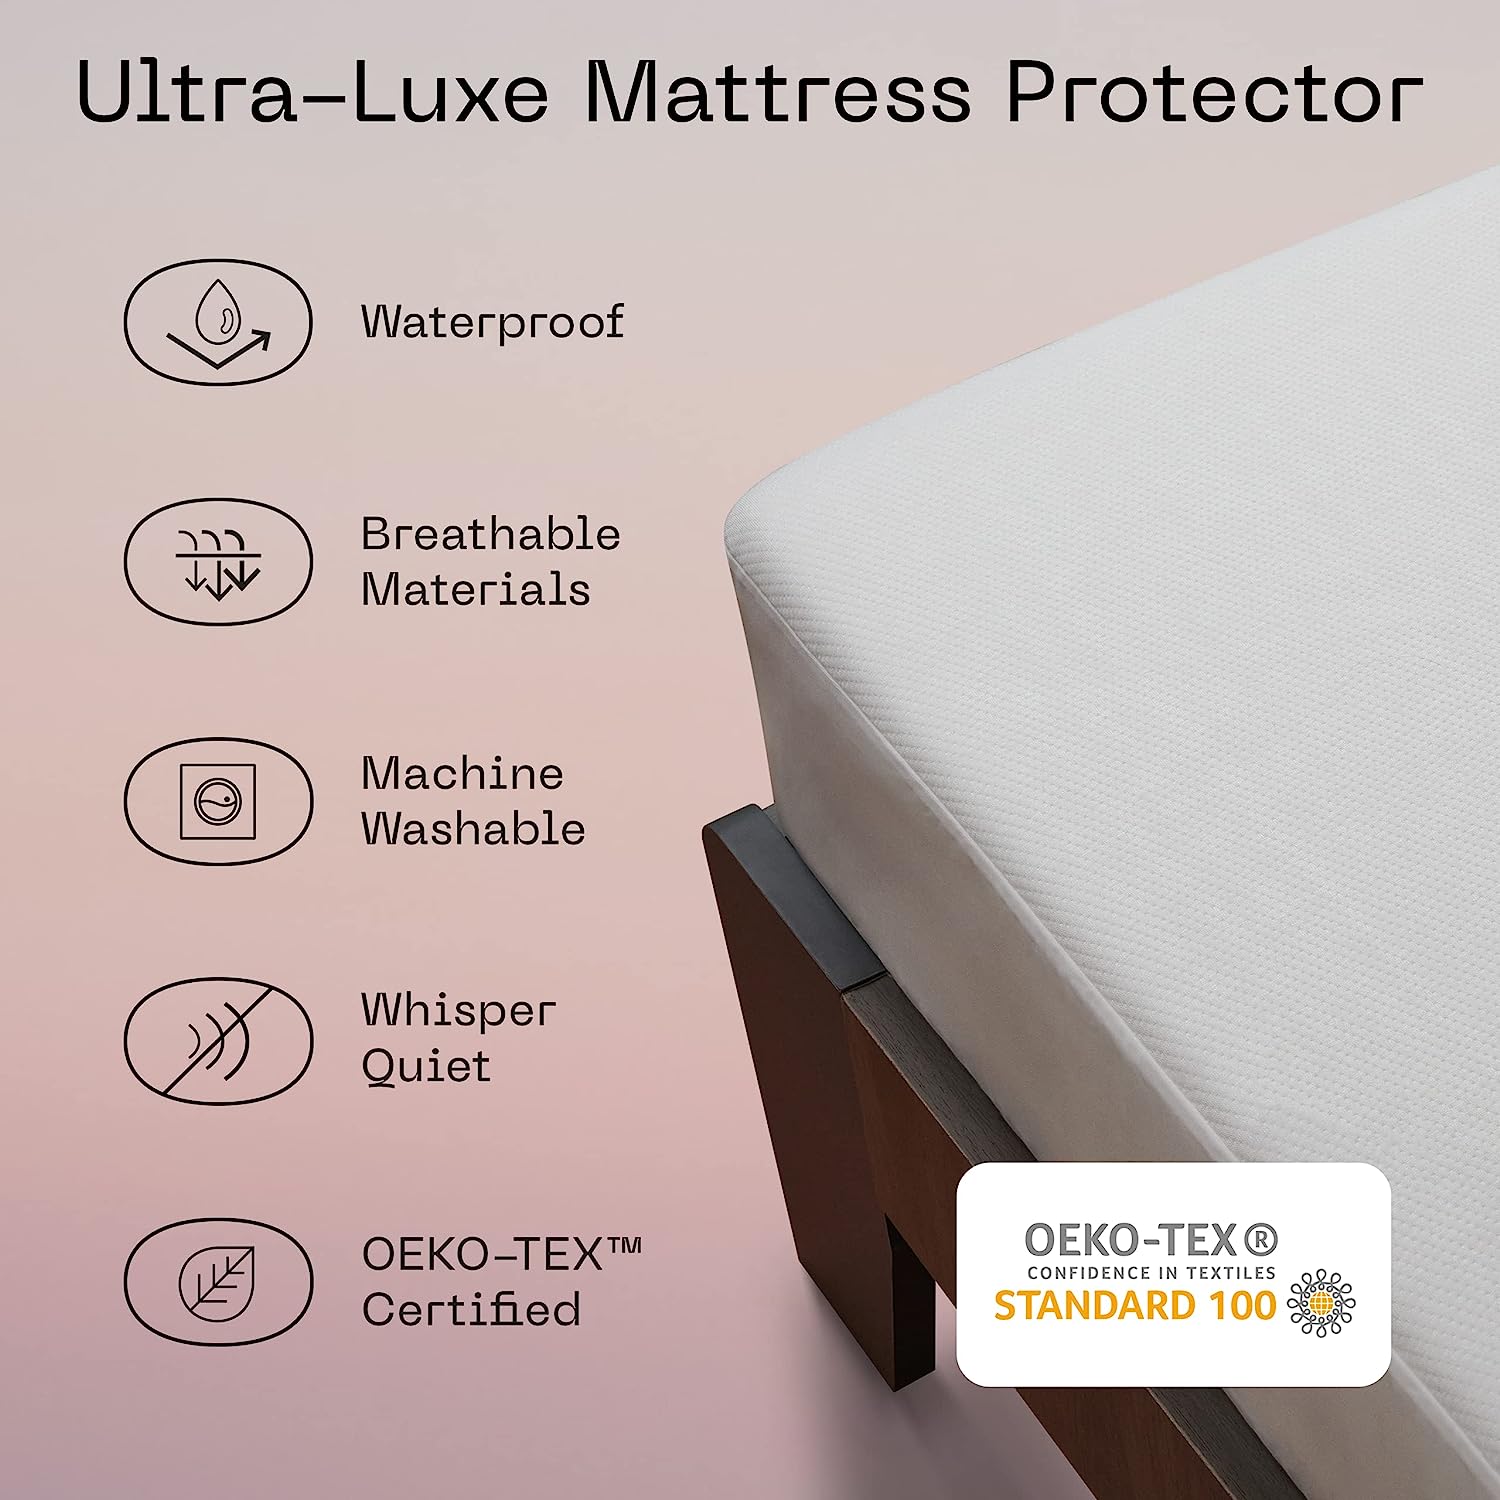 SureGuard Full Size Mattress Protector - 100% Waterproof, Hypoallergenic - Premium Fitted Cotton Terry Cover